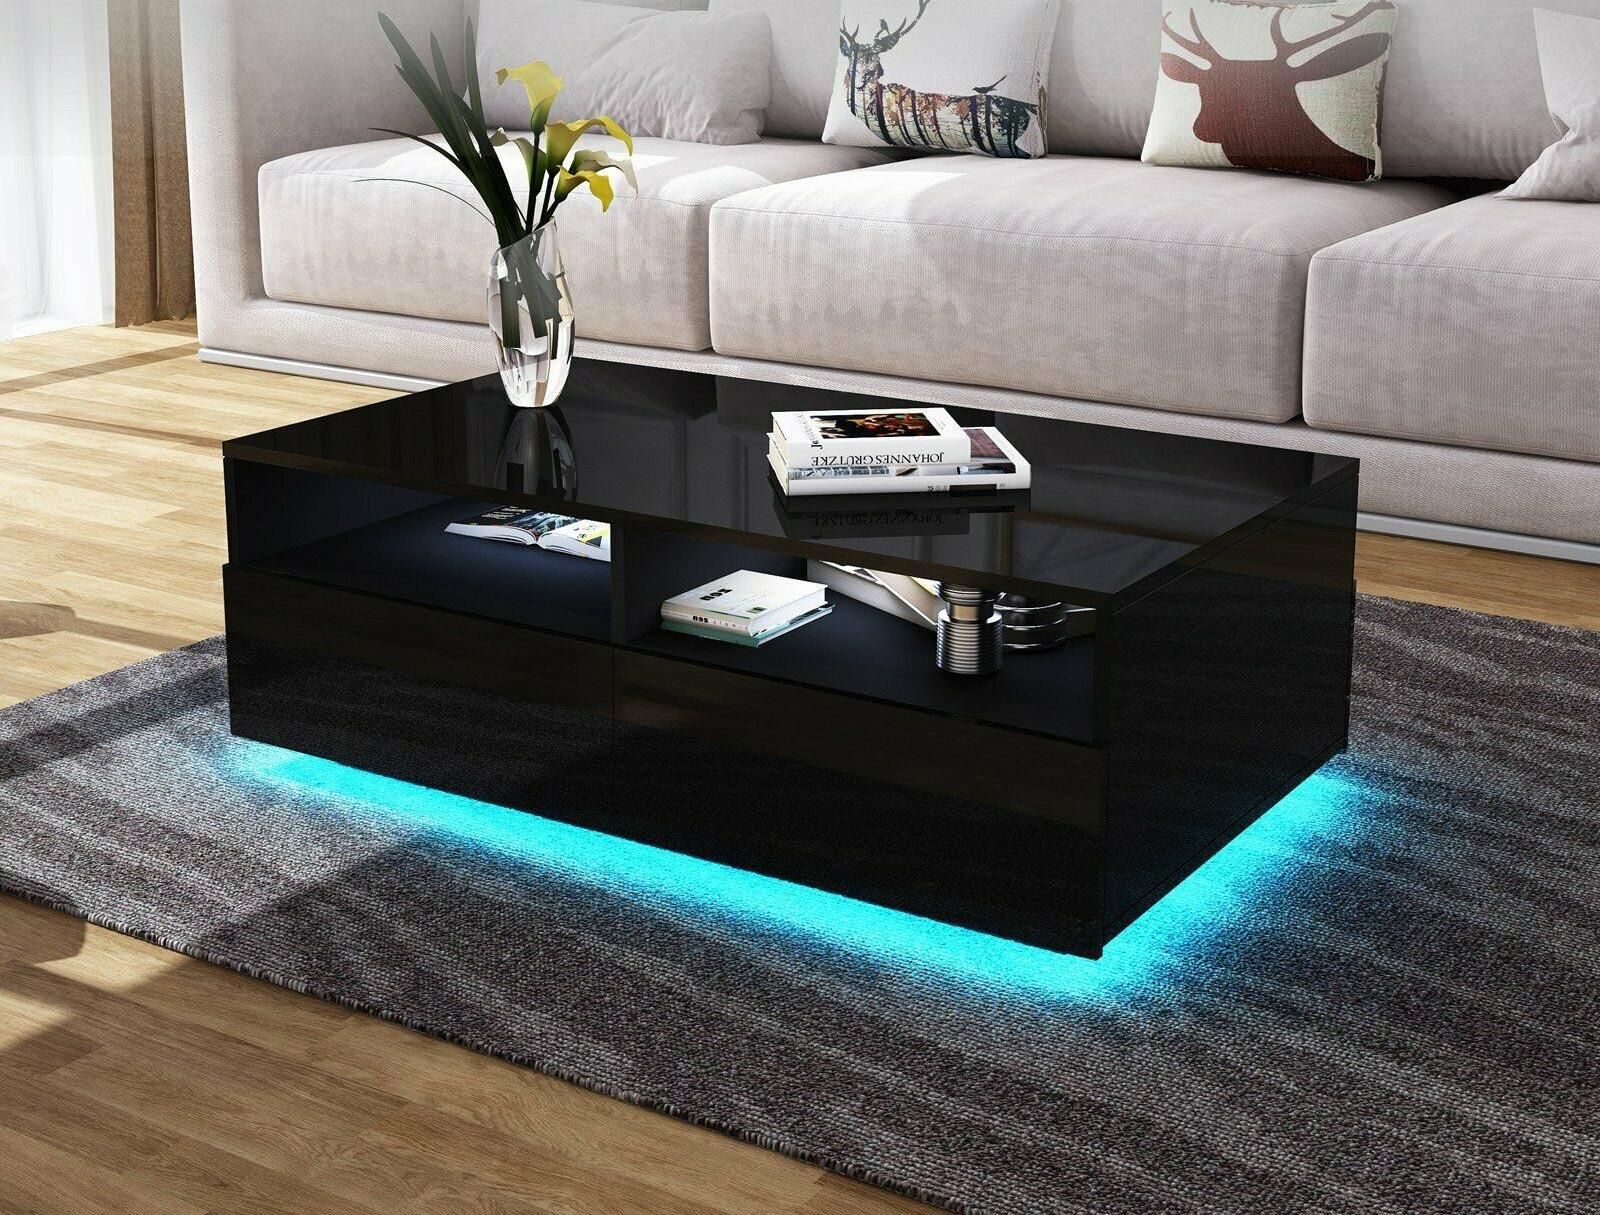 Living Room Rectangle Coffee Table 4 Drawers Rgb 16 Color Led Lights | Ebay In Coffee Tables With Drawers And Led Lights (View 7 of 15)